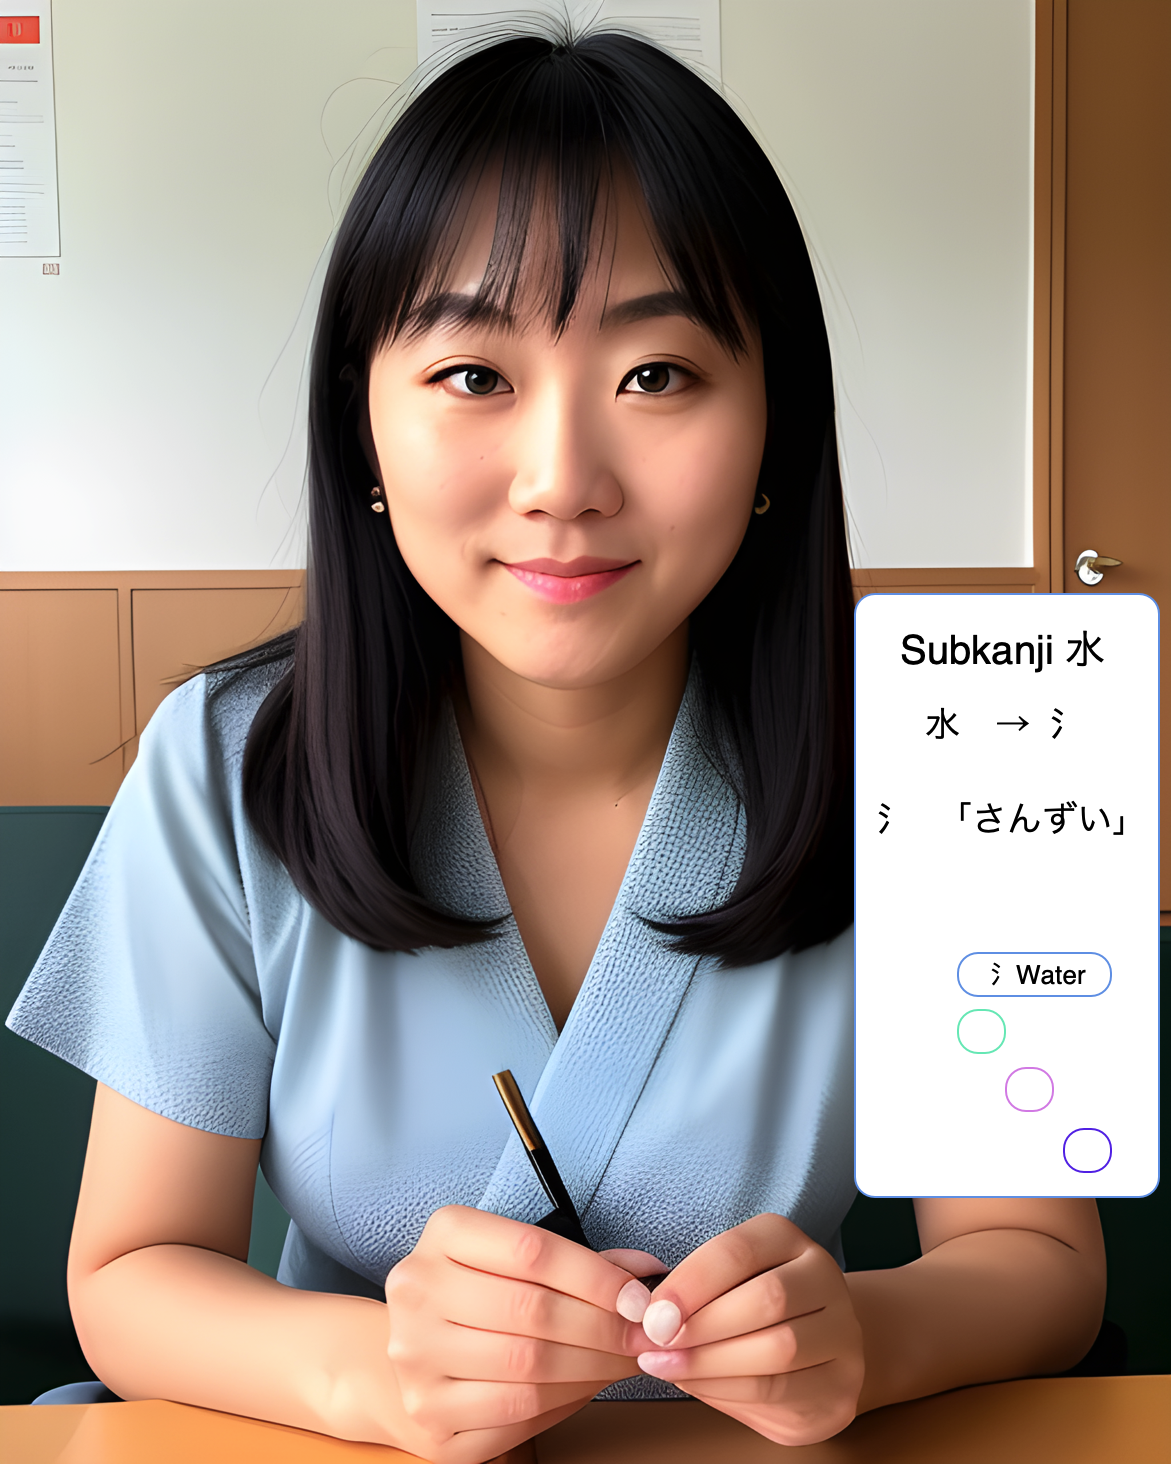 Master Japanese with your new digital sensei, ready to help you make it all the way from beginner to fluent, avoiding the learner plateaus by relying on Japanese Complete's curriculum.